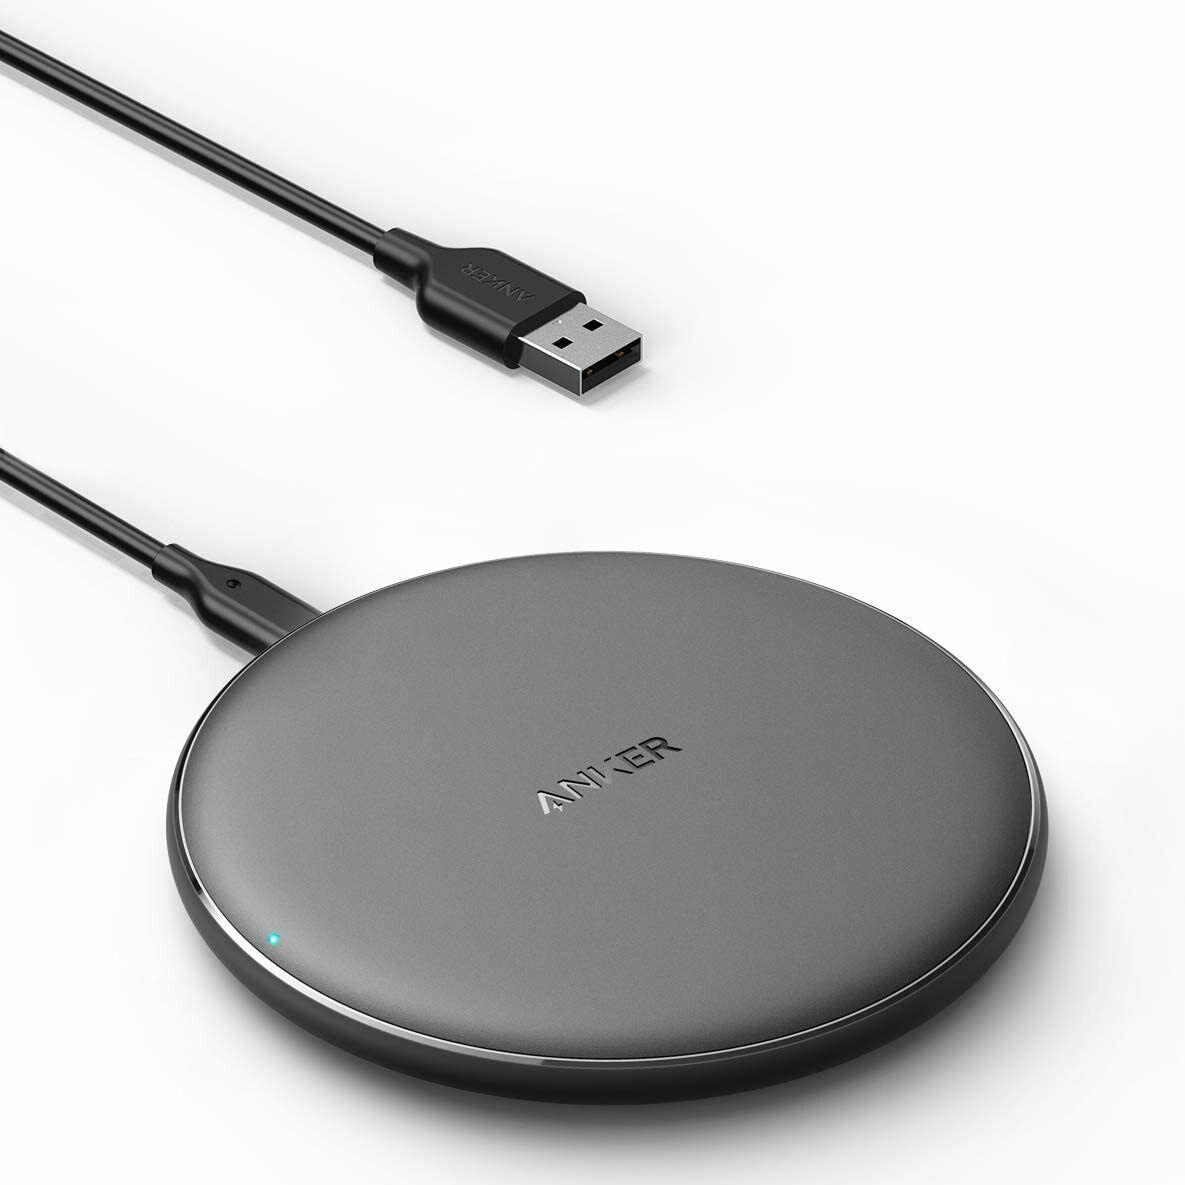 Anker 10W Qi-Certified PowerWave Wireless Charger Pad for $10.99 Shipped